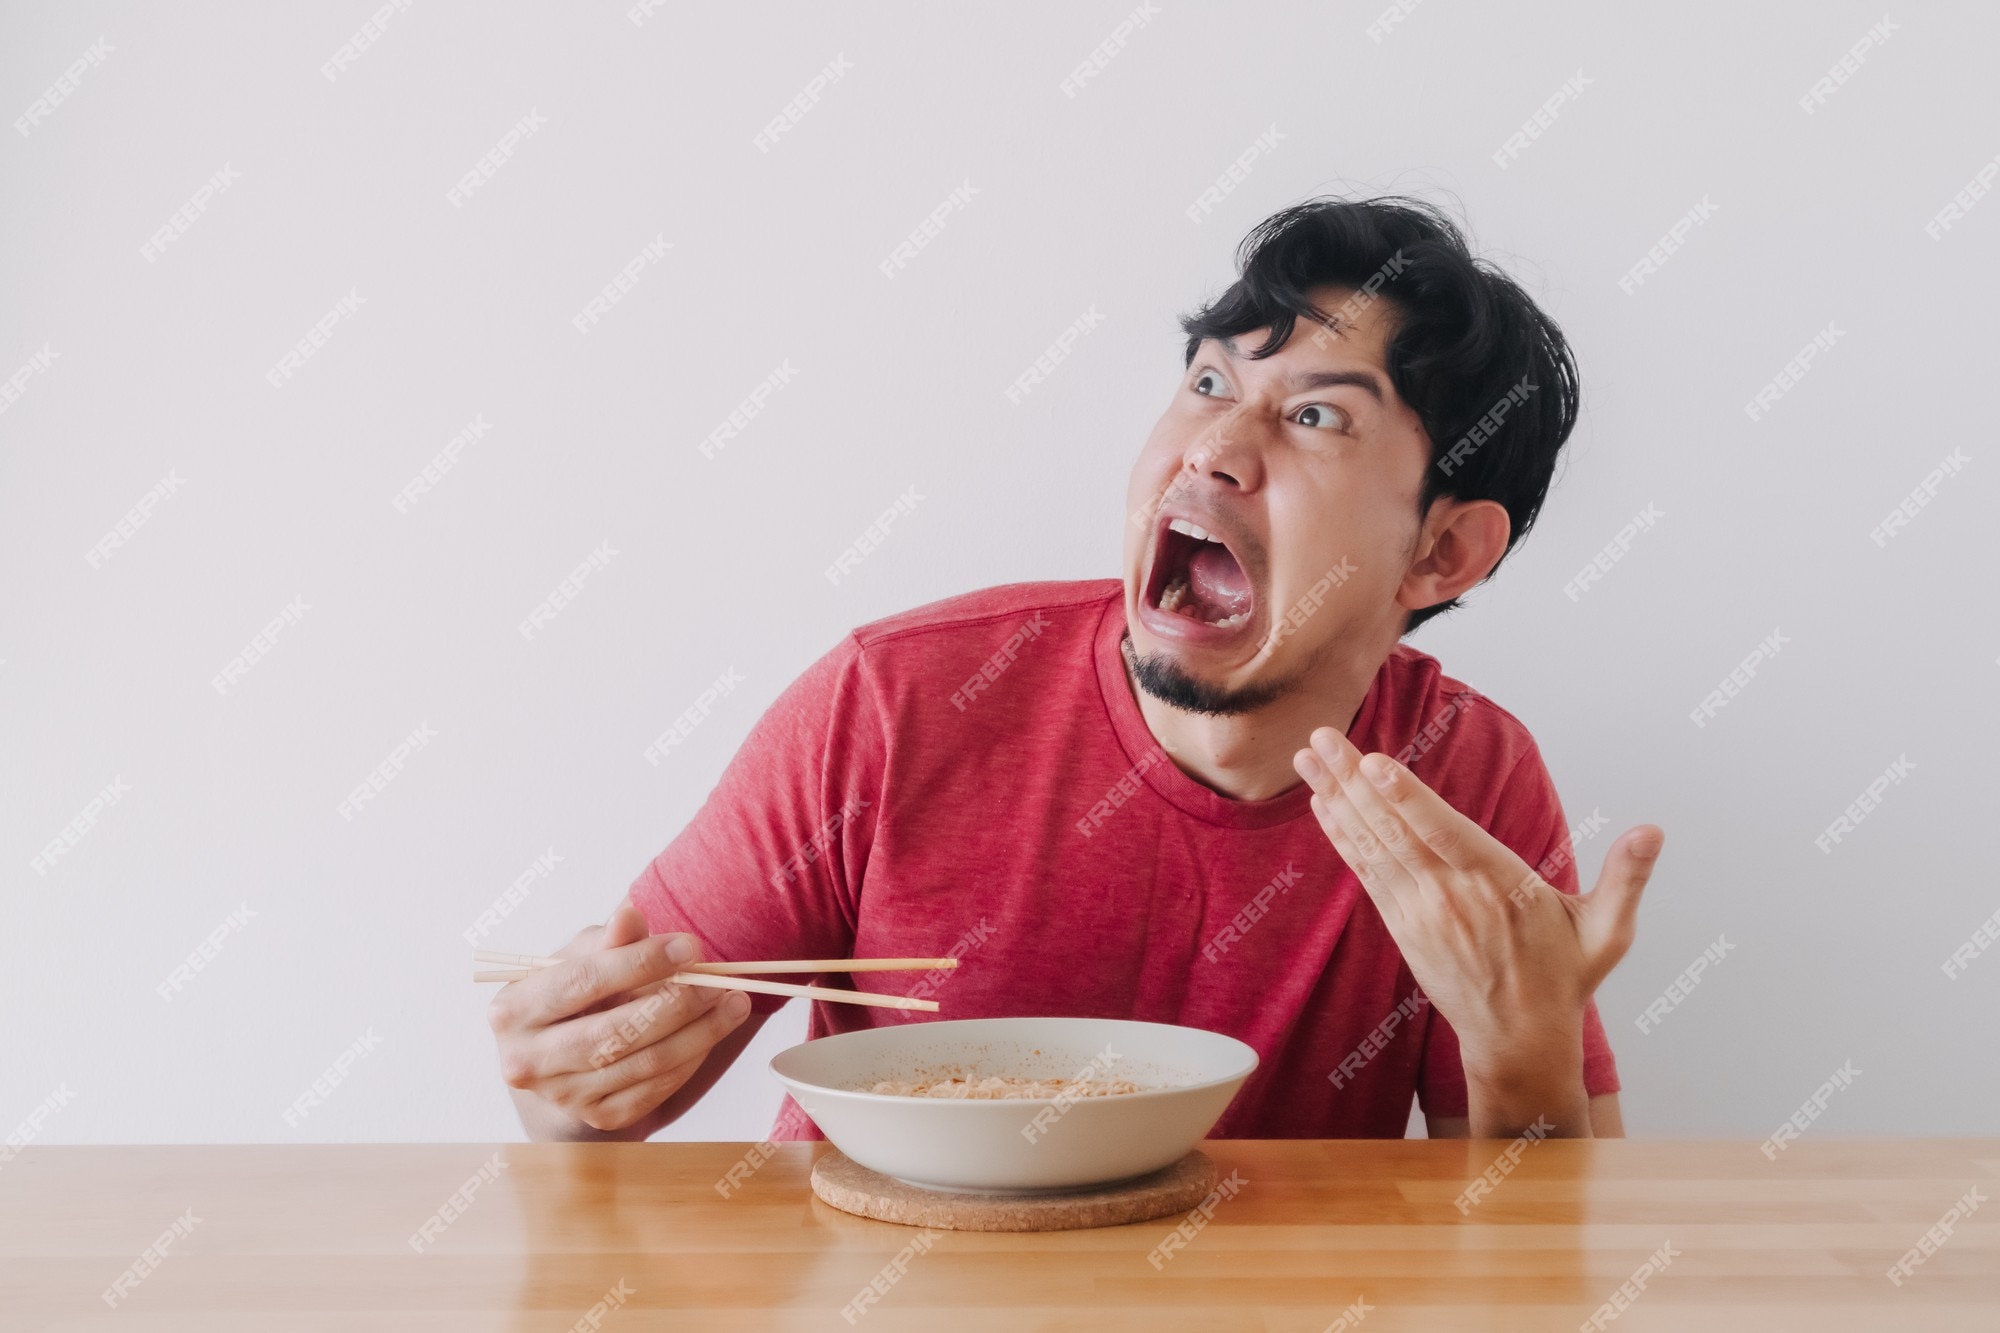 Premium Photo | Funny face of man eat very hot and spicy instant noodle